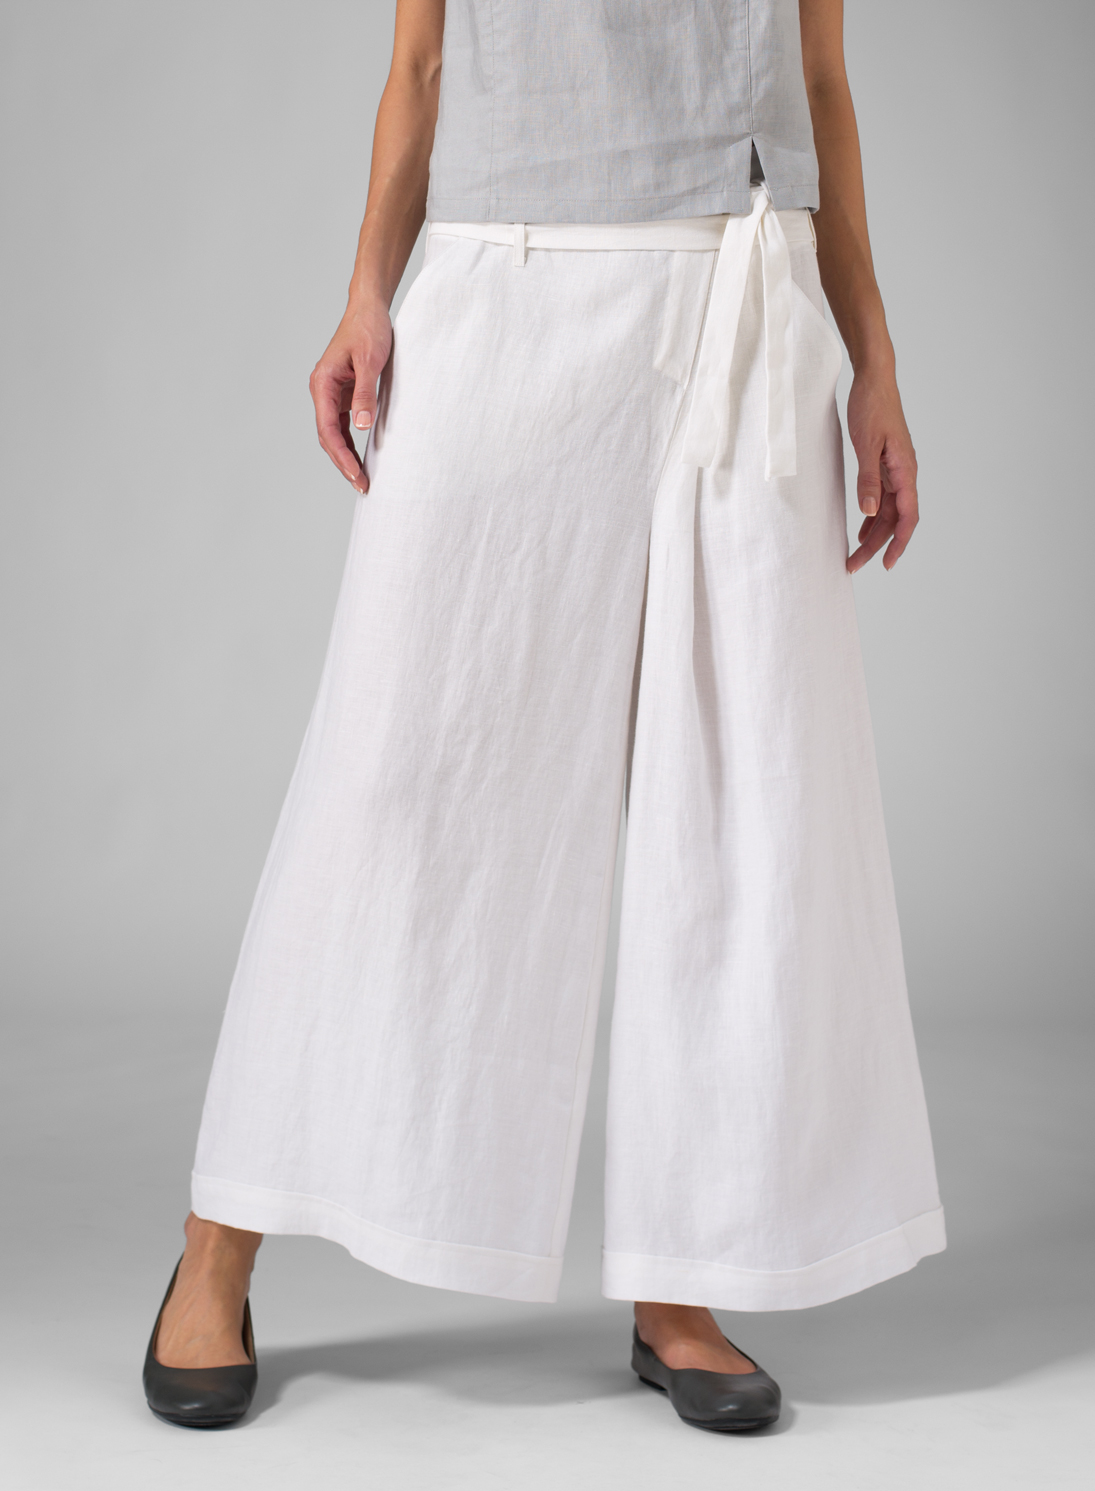 WIDE LEG LINEN PANTS OUTFIT, Gallery posted by MarissaNewvine